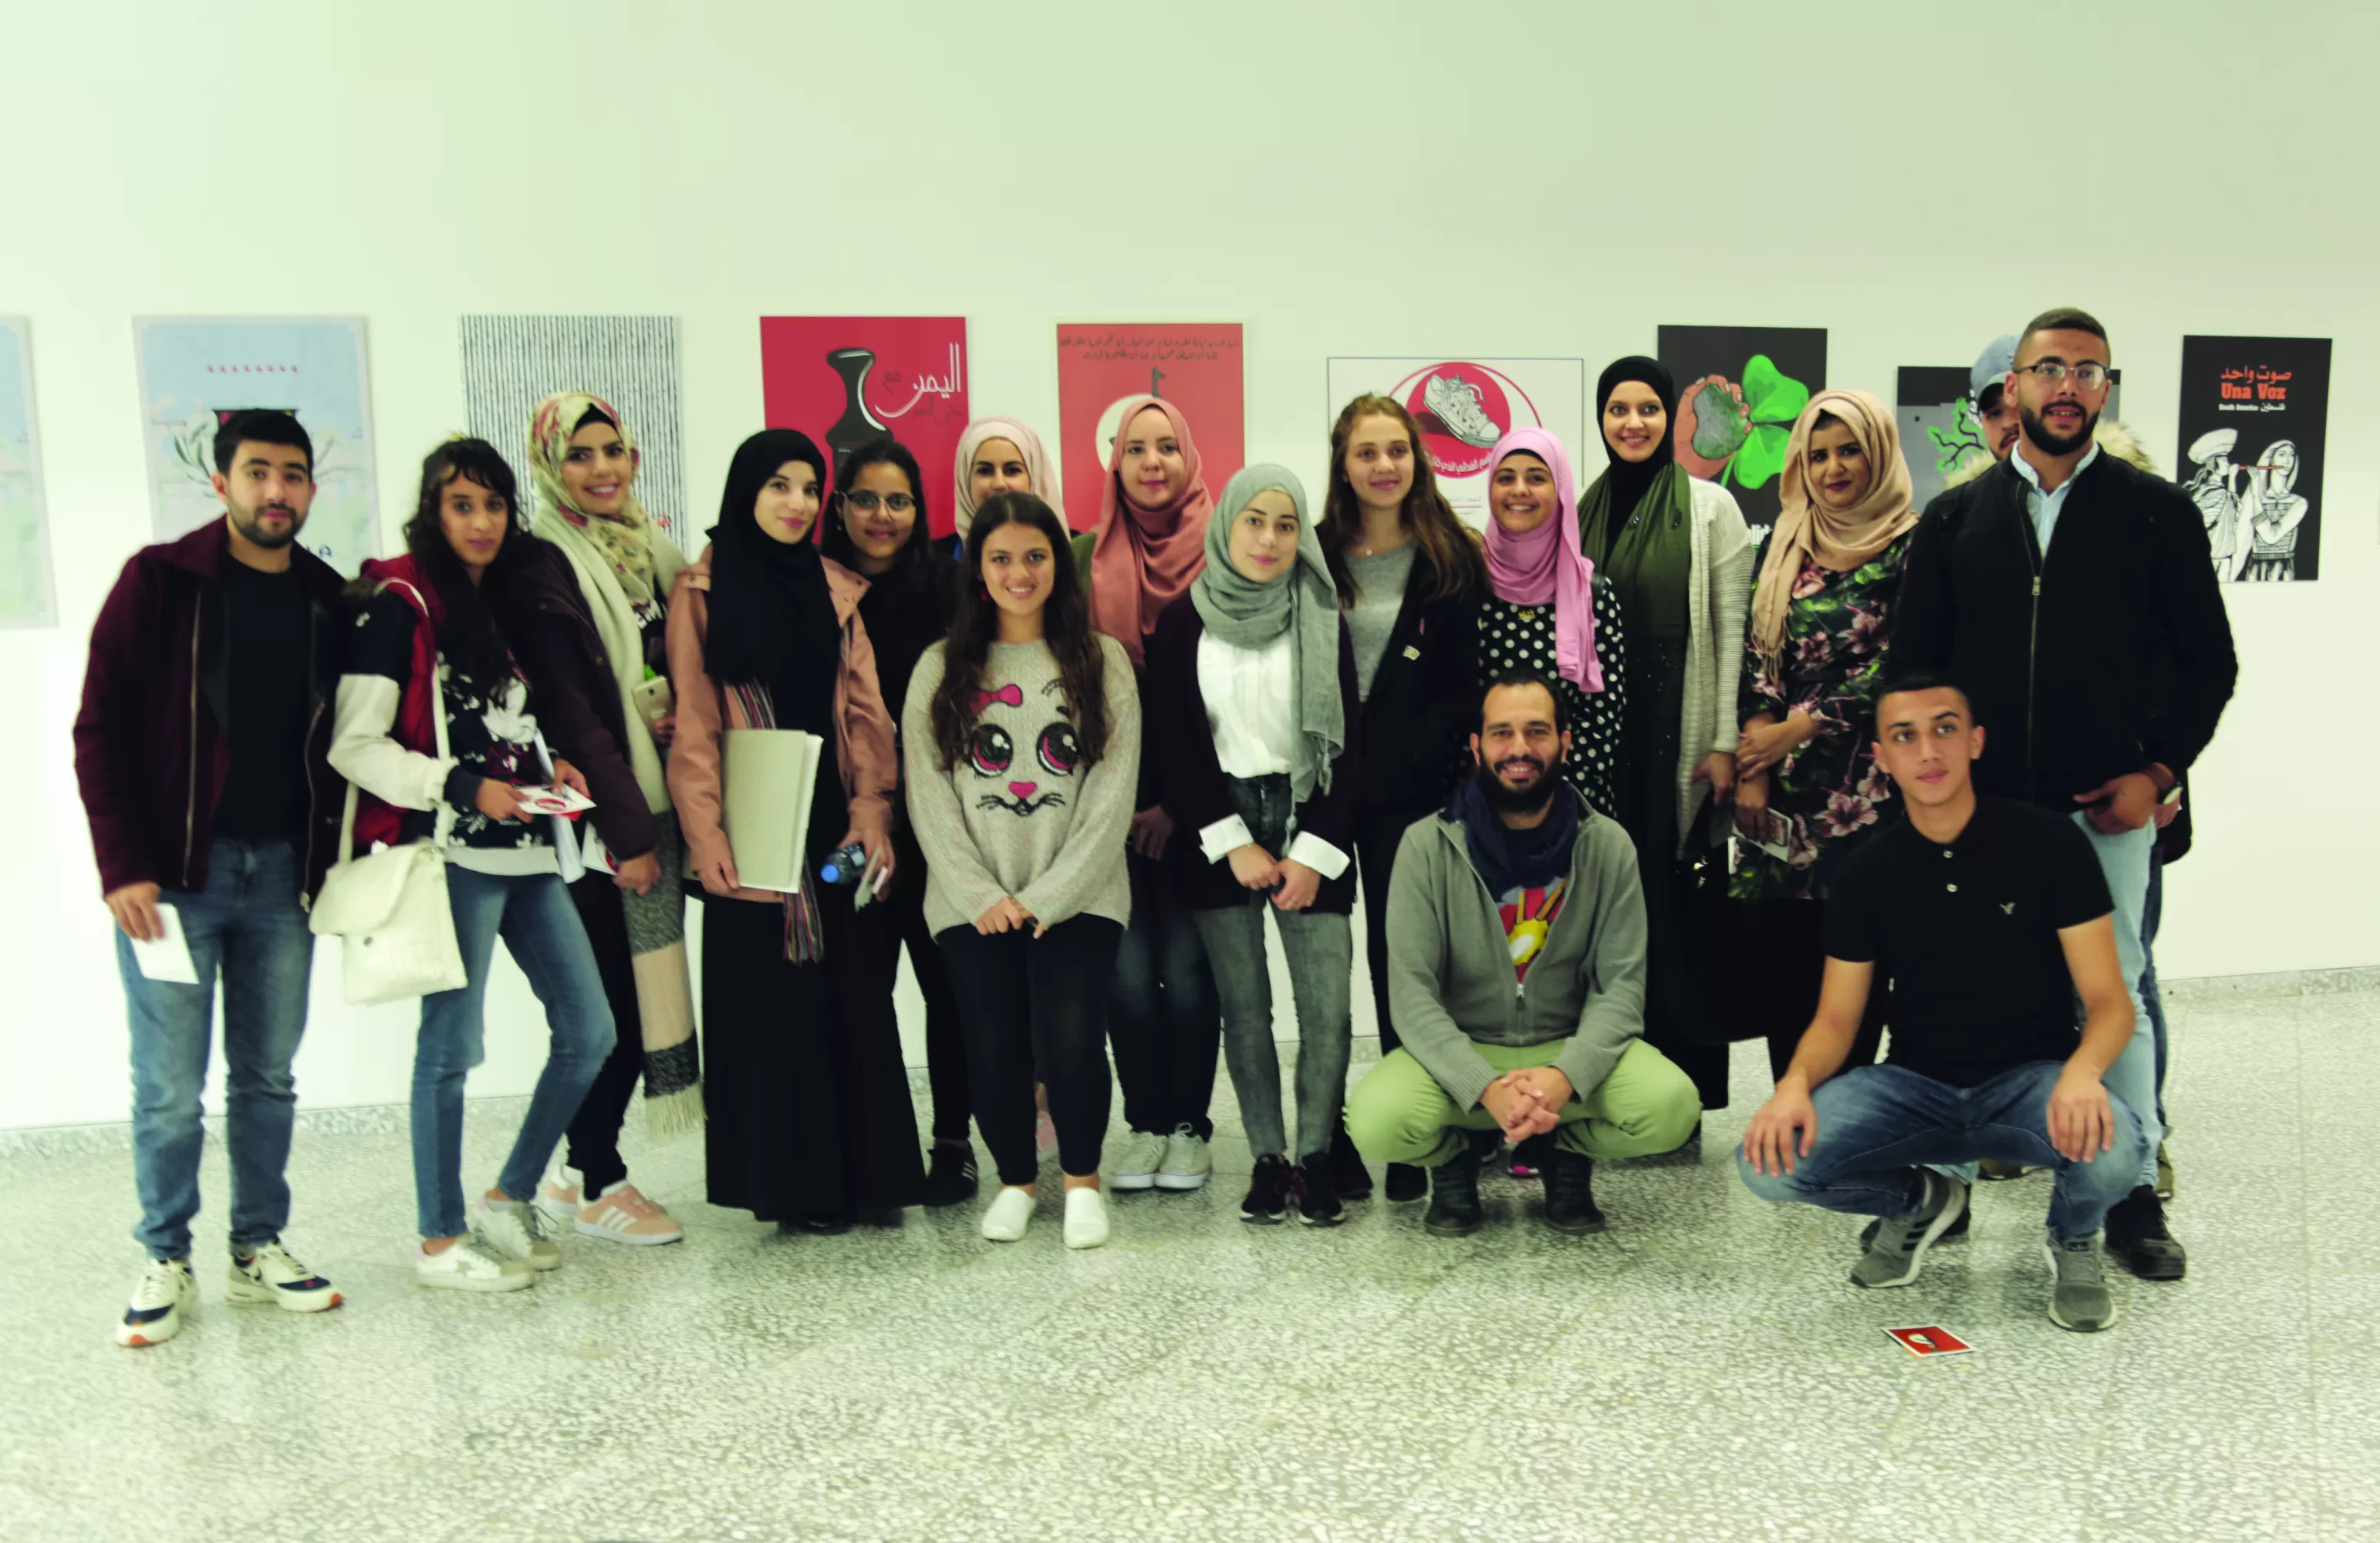 Photos from the art workshop Solidarity Revival with the artist Amer Shomali. Shomali implemented this workshop voluntarily with the Public Programme for a group of emerging artists and art students. The workshop aimed to produce contemporary Palestinian posters to renew Palestinian solidarity with the world’s oppressed peoples and took place on October 19th and 20th 2018. 